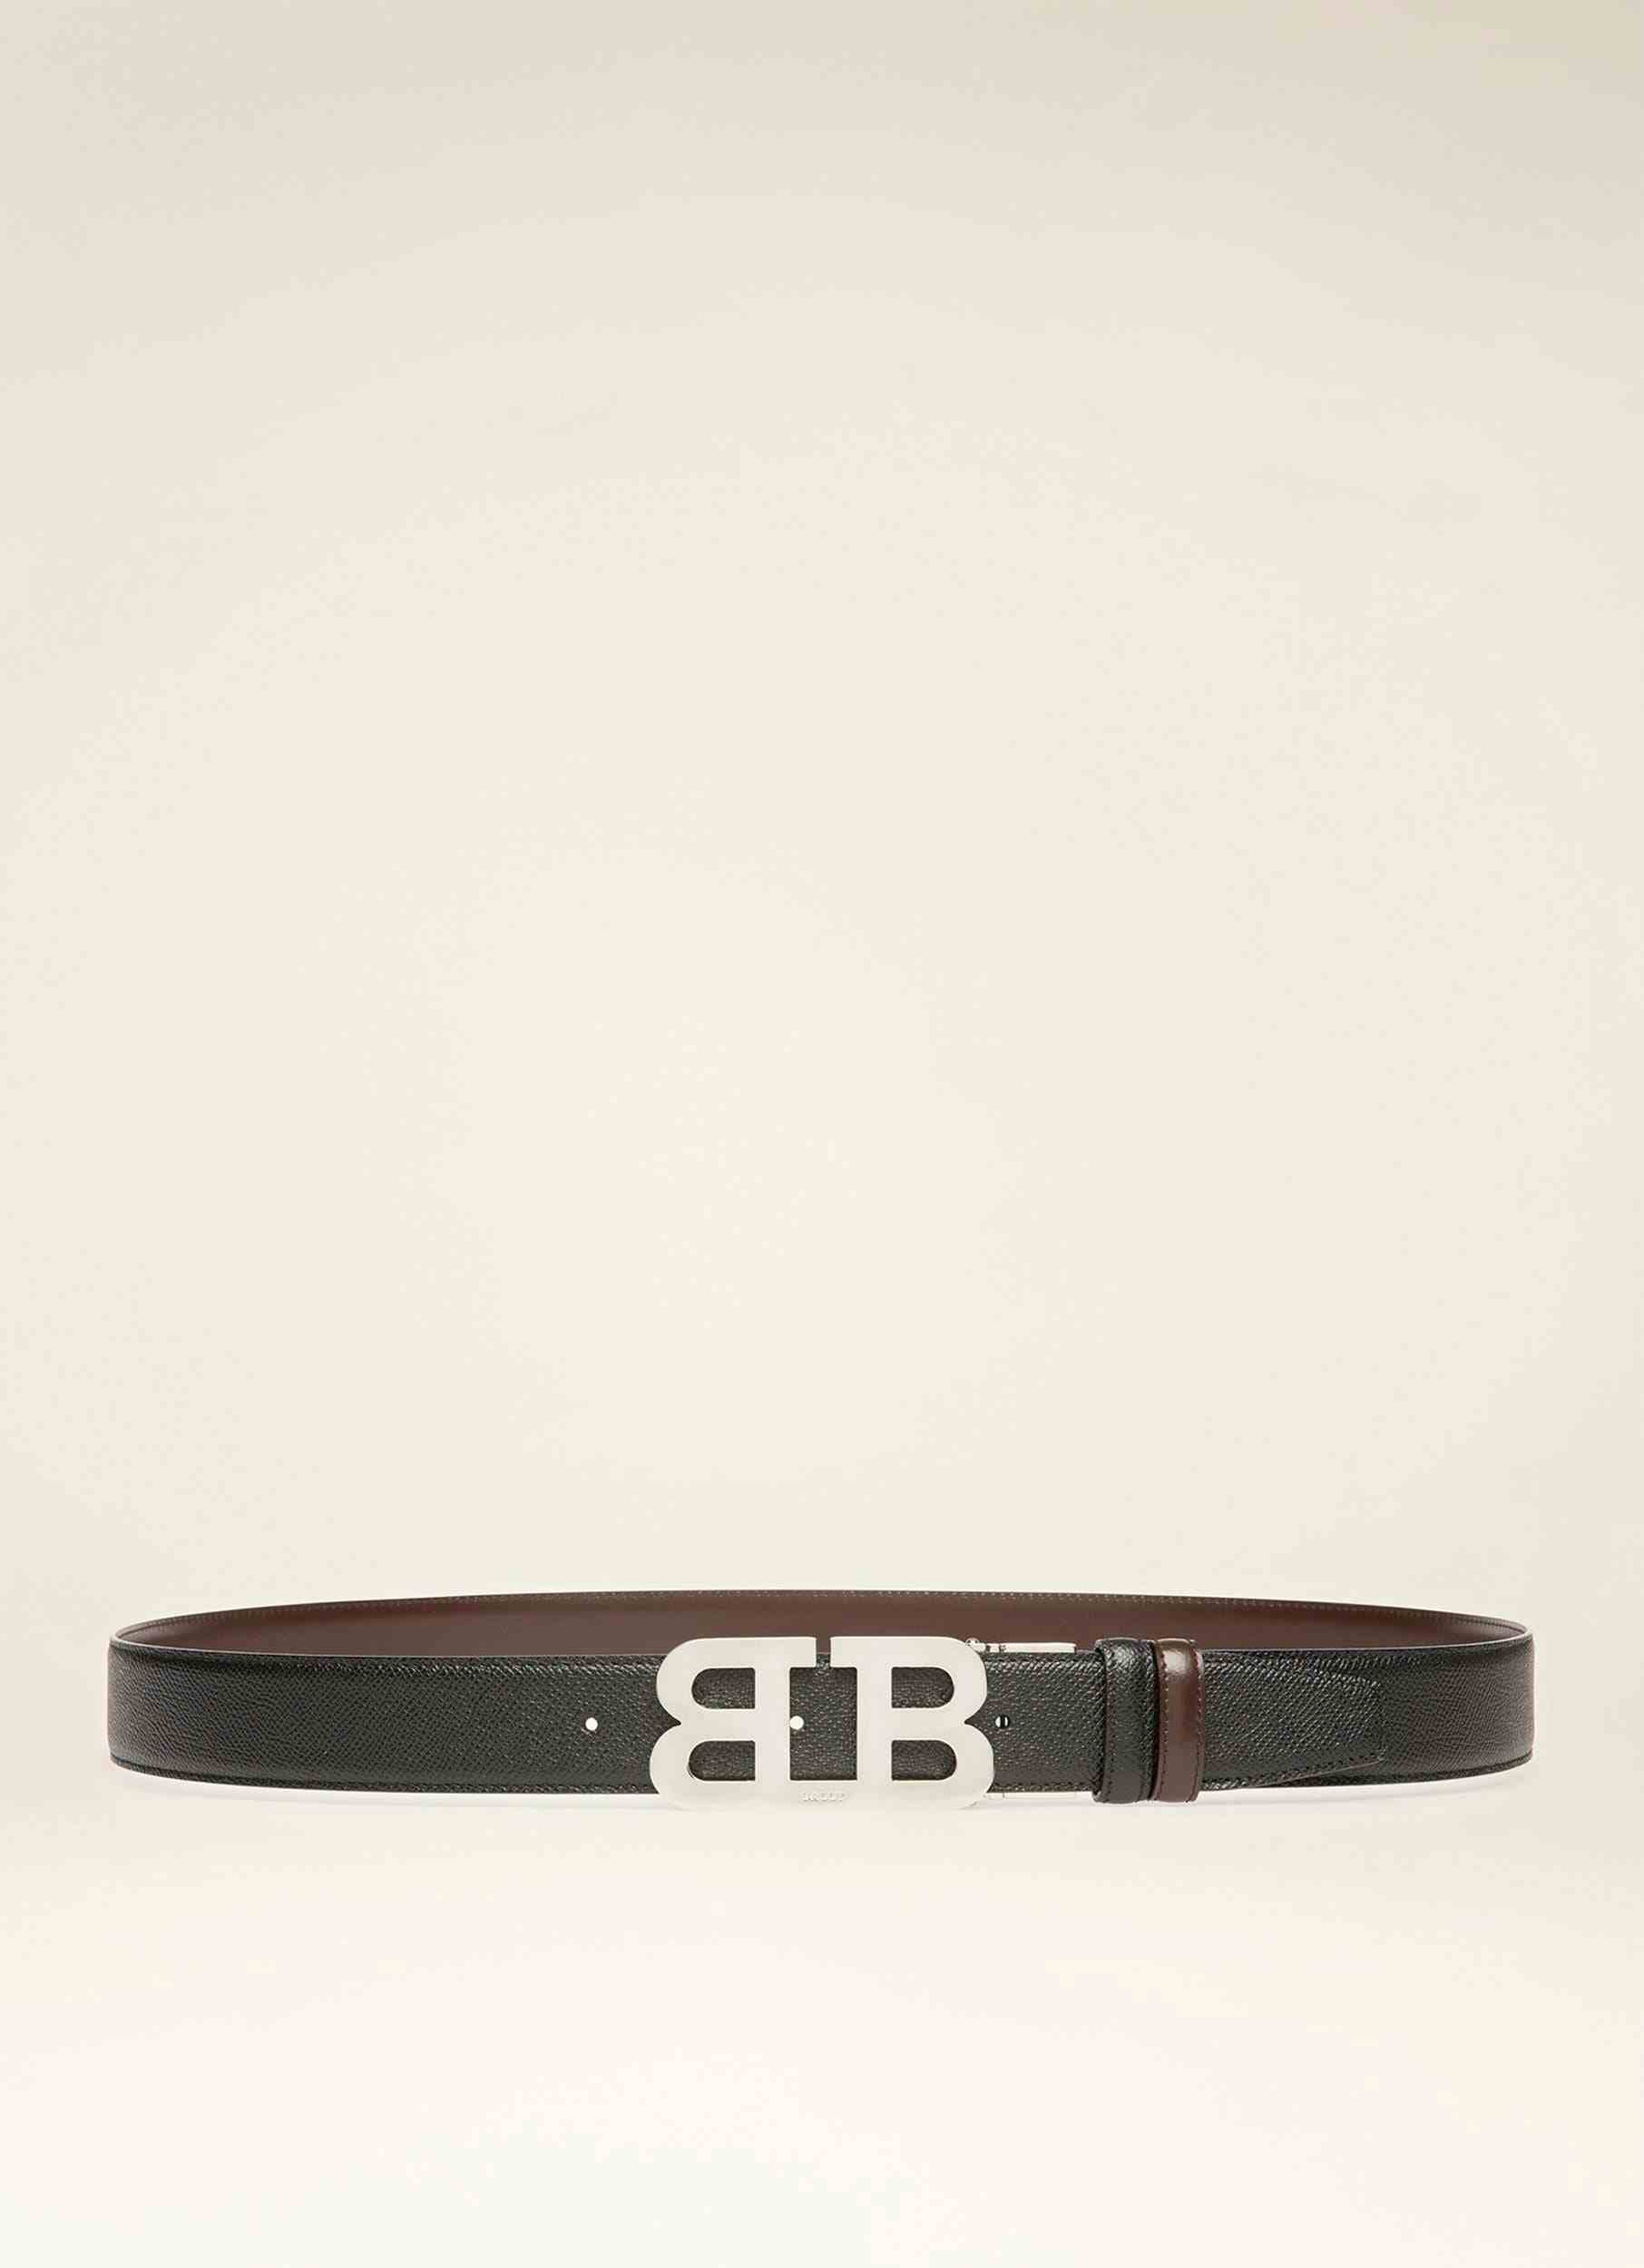 BALLY ICONIC BUCKLE Leather 35Mm Belt In Black & Brown - Men's - Bally